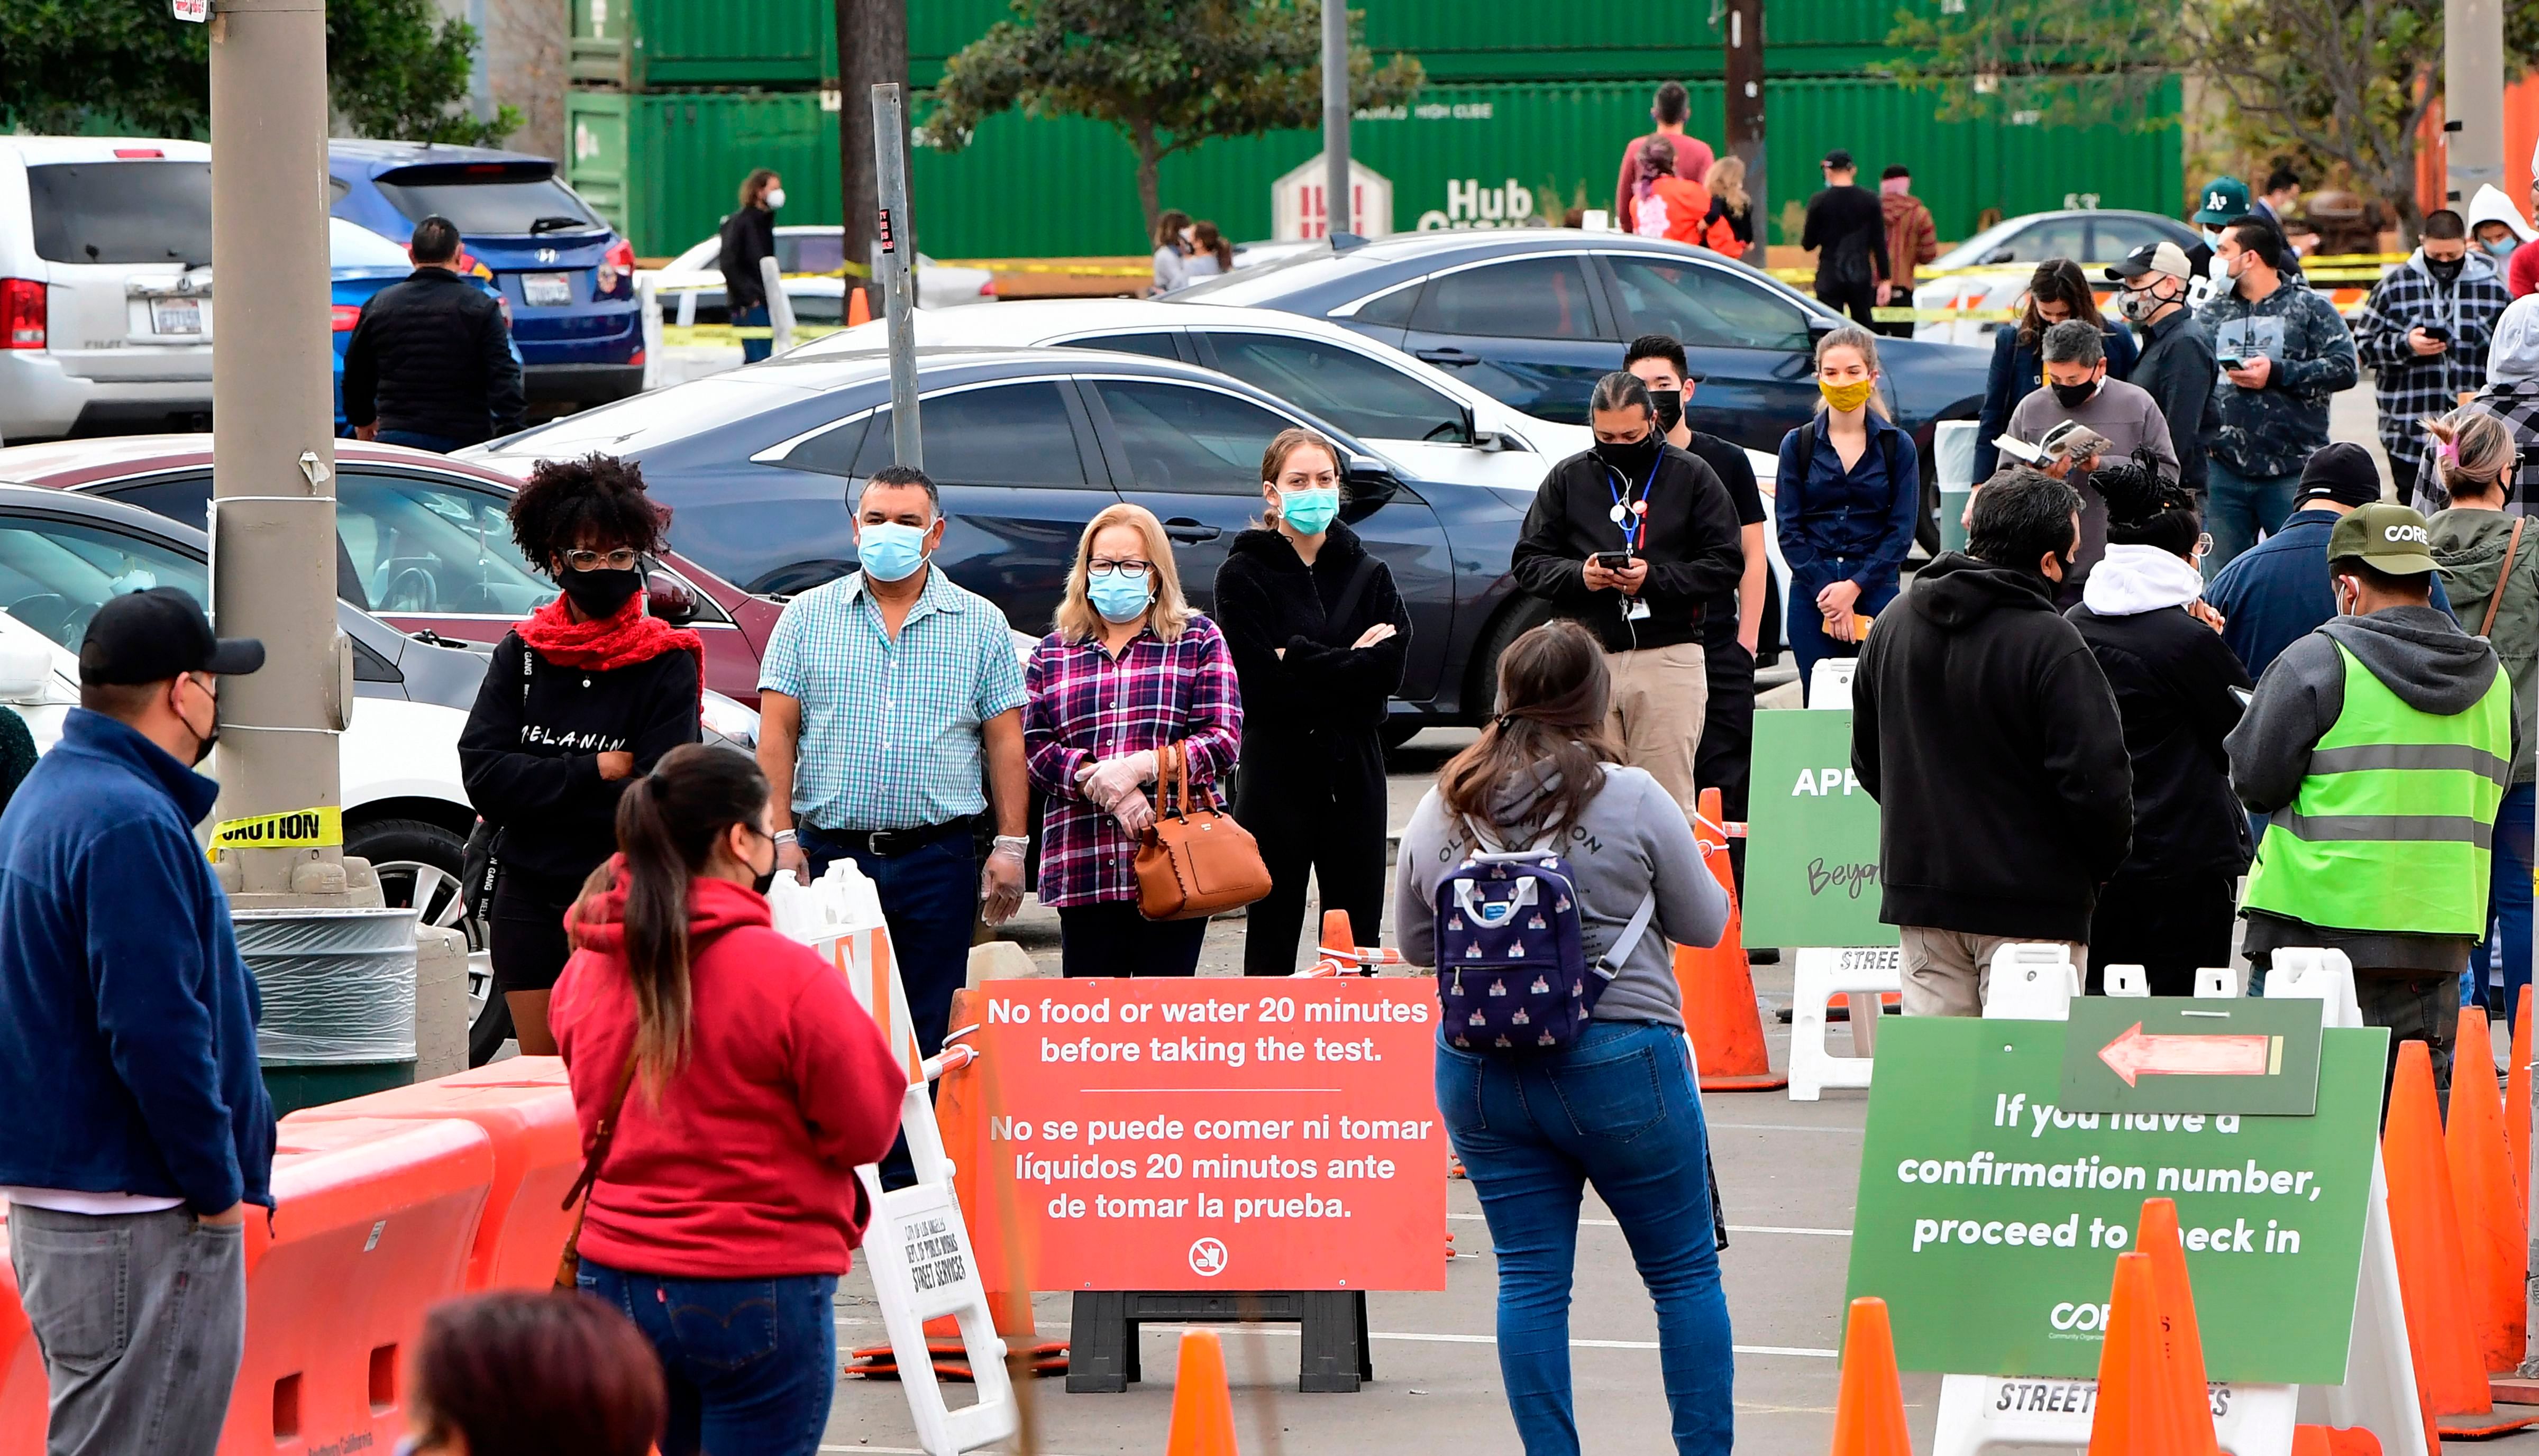 People wait in line at a COVID-19 testing center despite the Stay-At-Home regulation underway in Los Angeles, California. Credit: AFP Photo